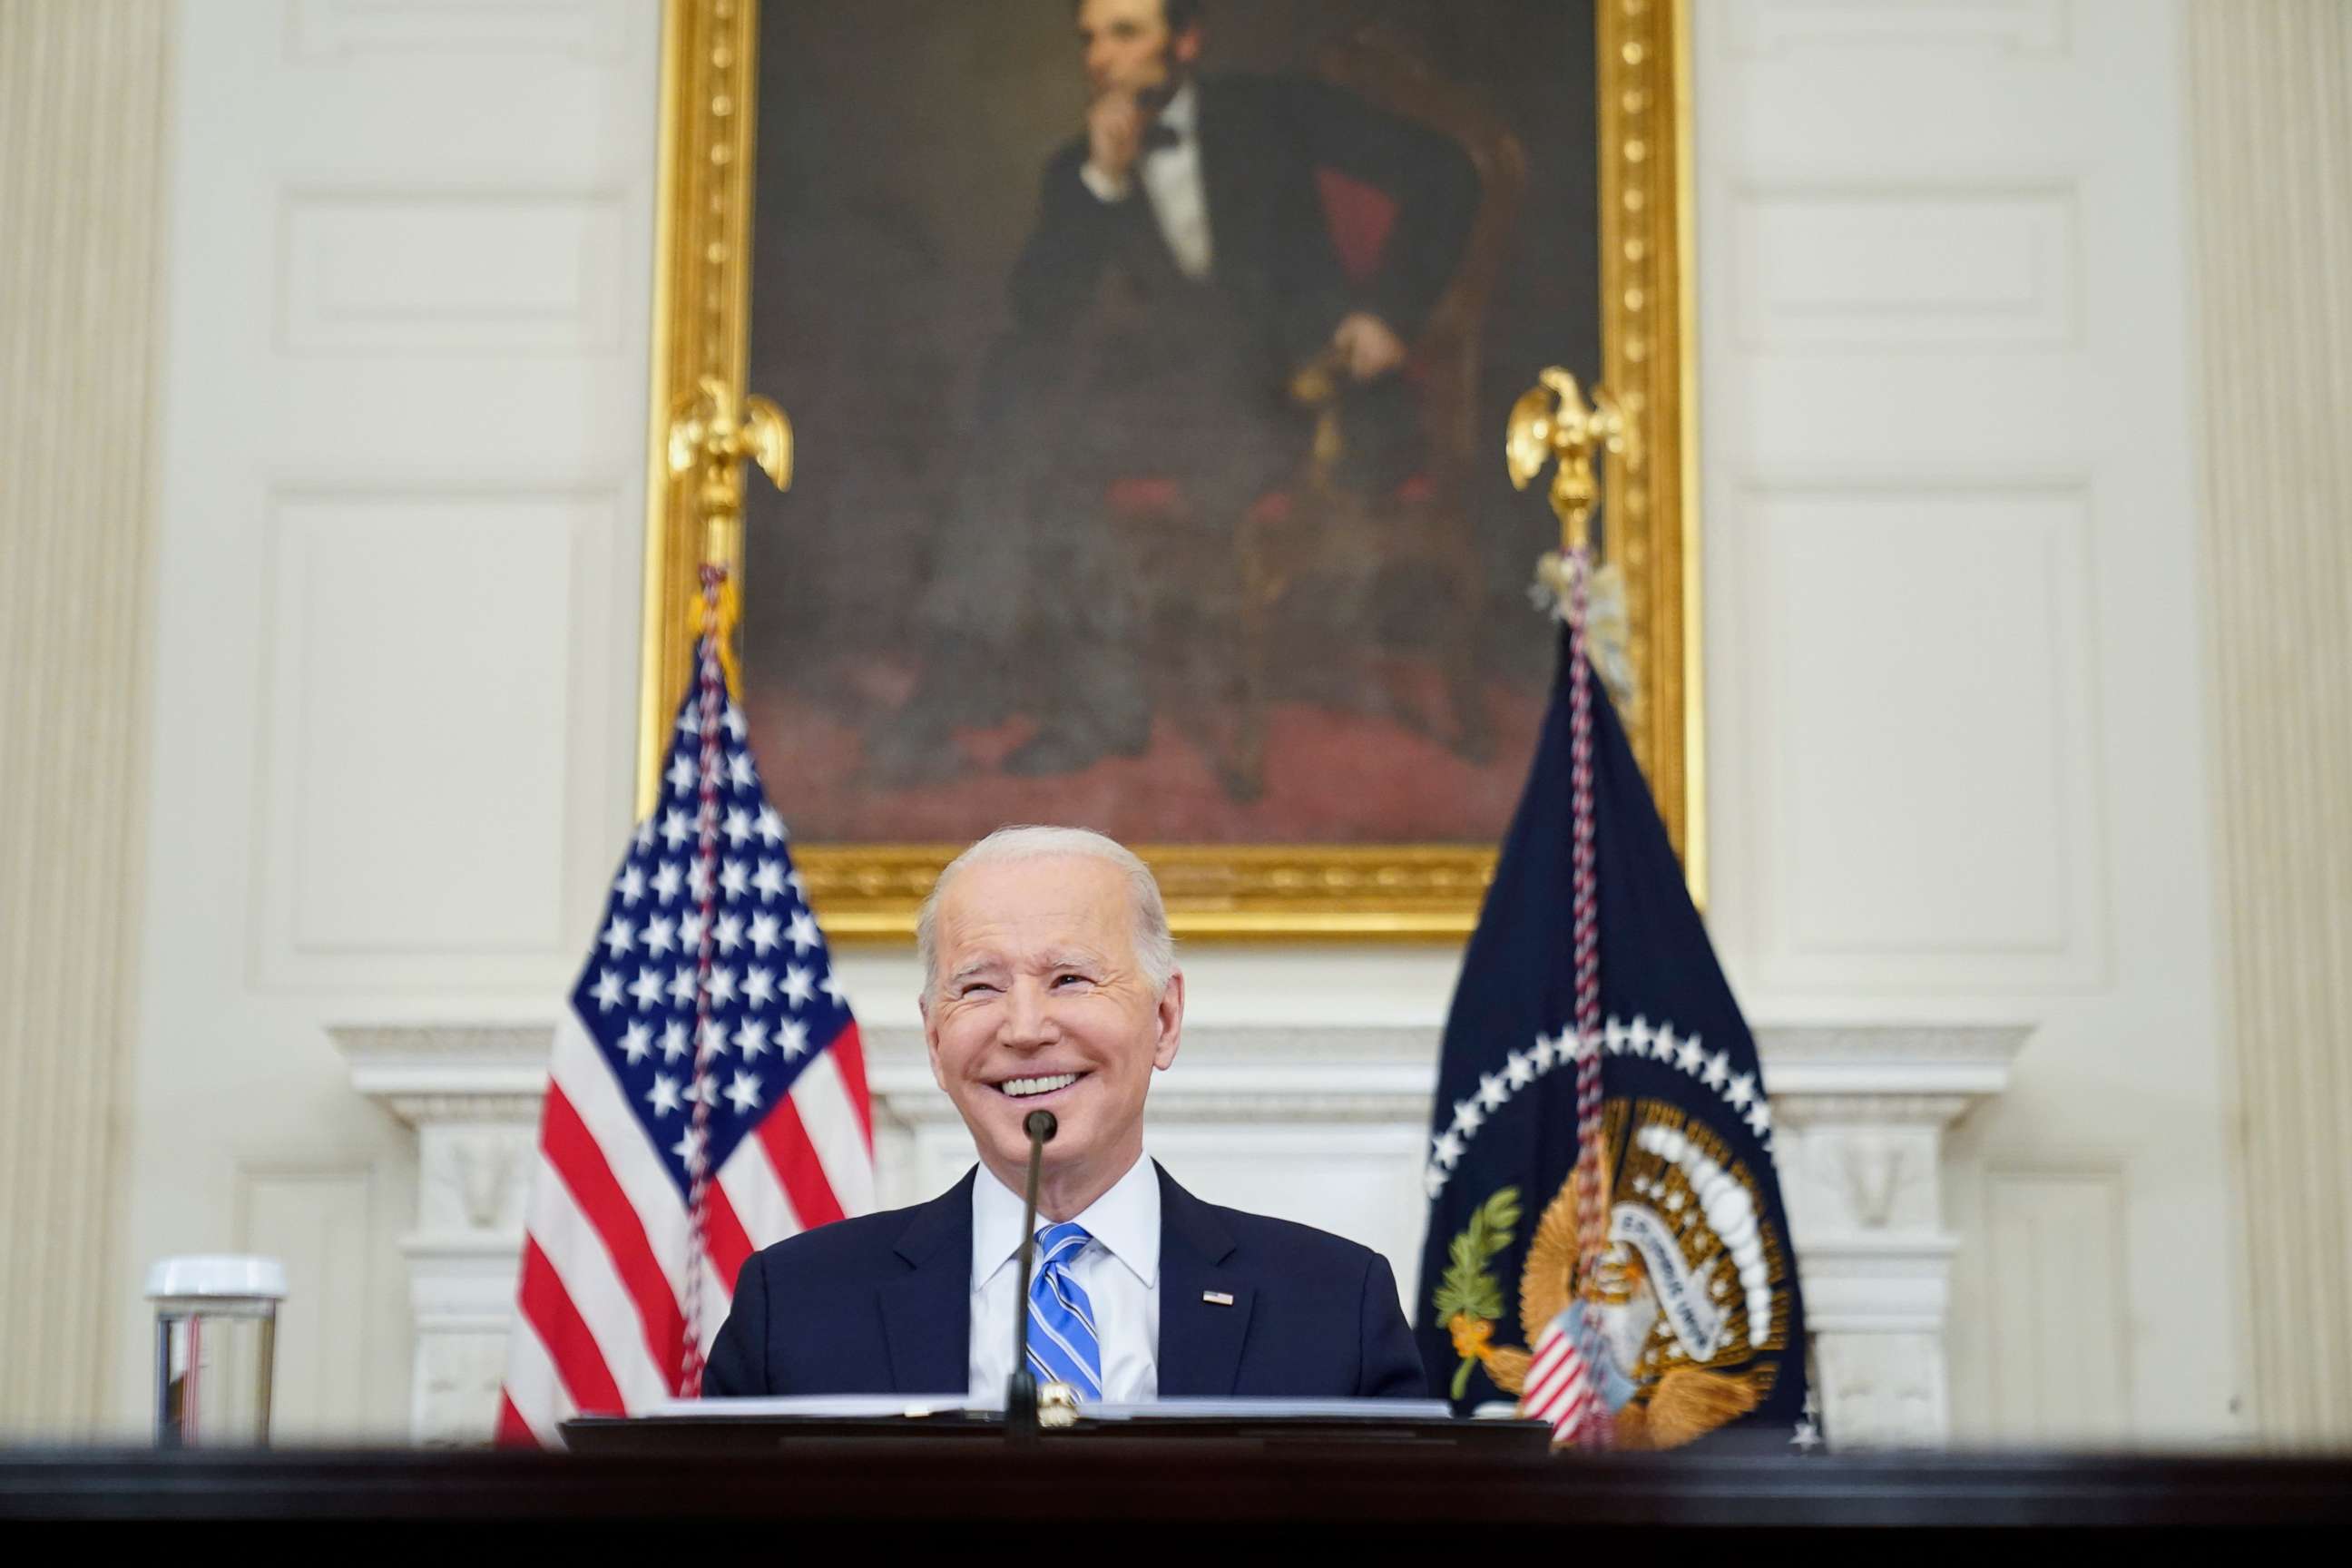 PHOTO: President Joe Biden speaks during a meeting with private sector CEOs about the economy in the State Dining Room of the White House, Jan. 26, 2022.